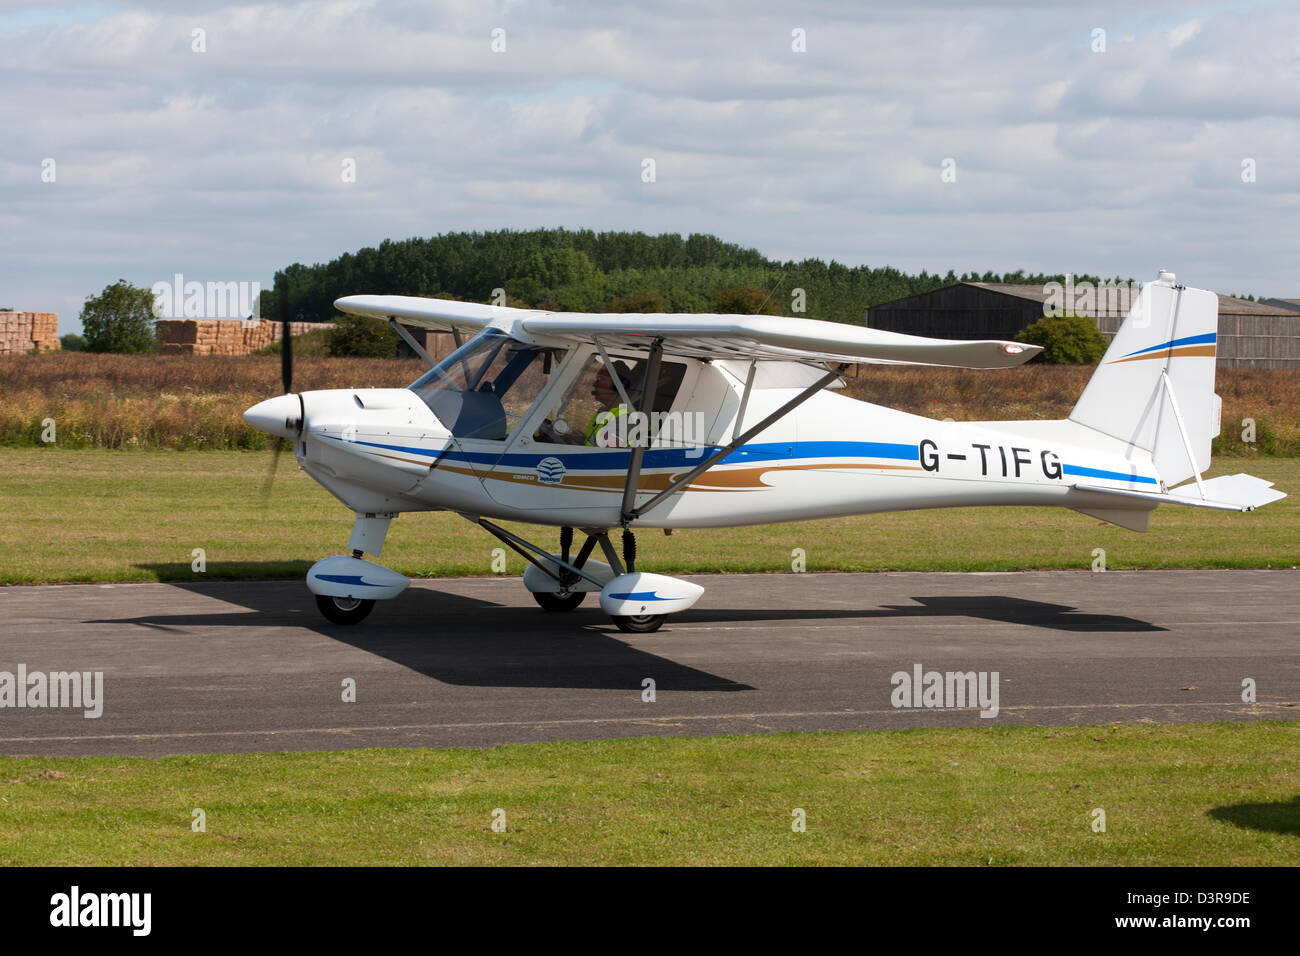 Ikarus C42 FB80 G-TIFG taxiing at Breighton Airfield Stock Photo